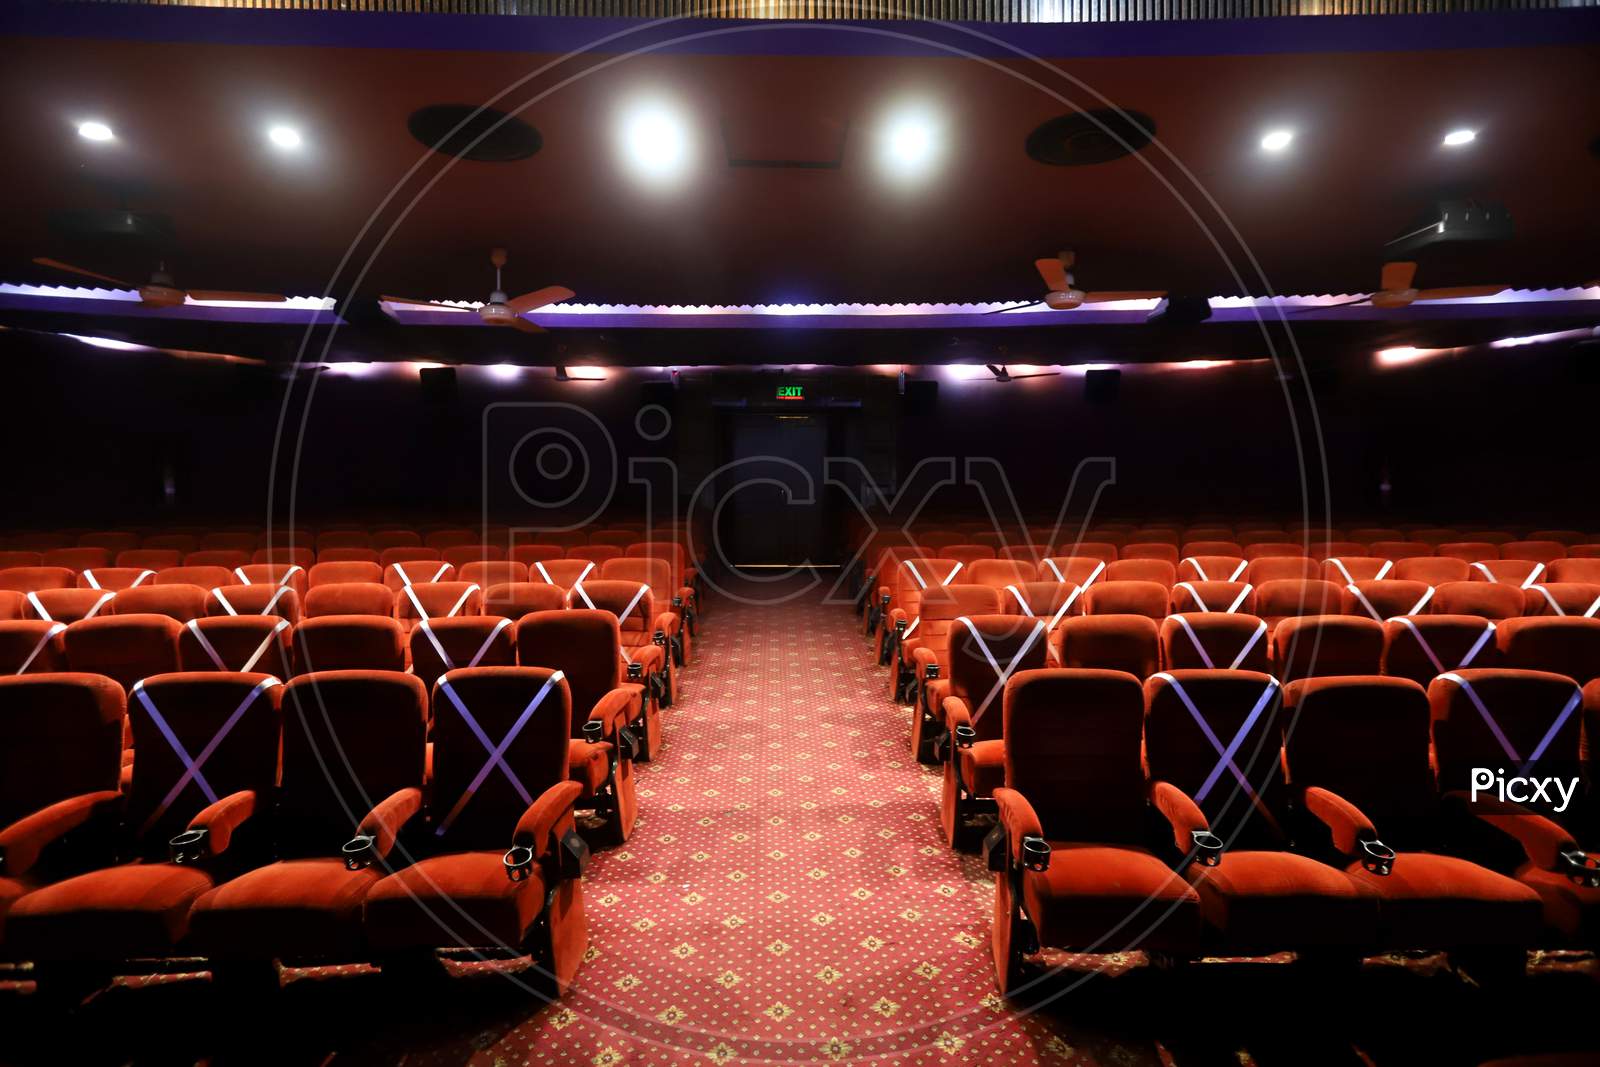 Tape is displayed on seats to implement safe distancing measures at a film theater in the  Delite cinema in New Delhi, India, on October. 13, 2020.